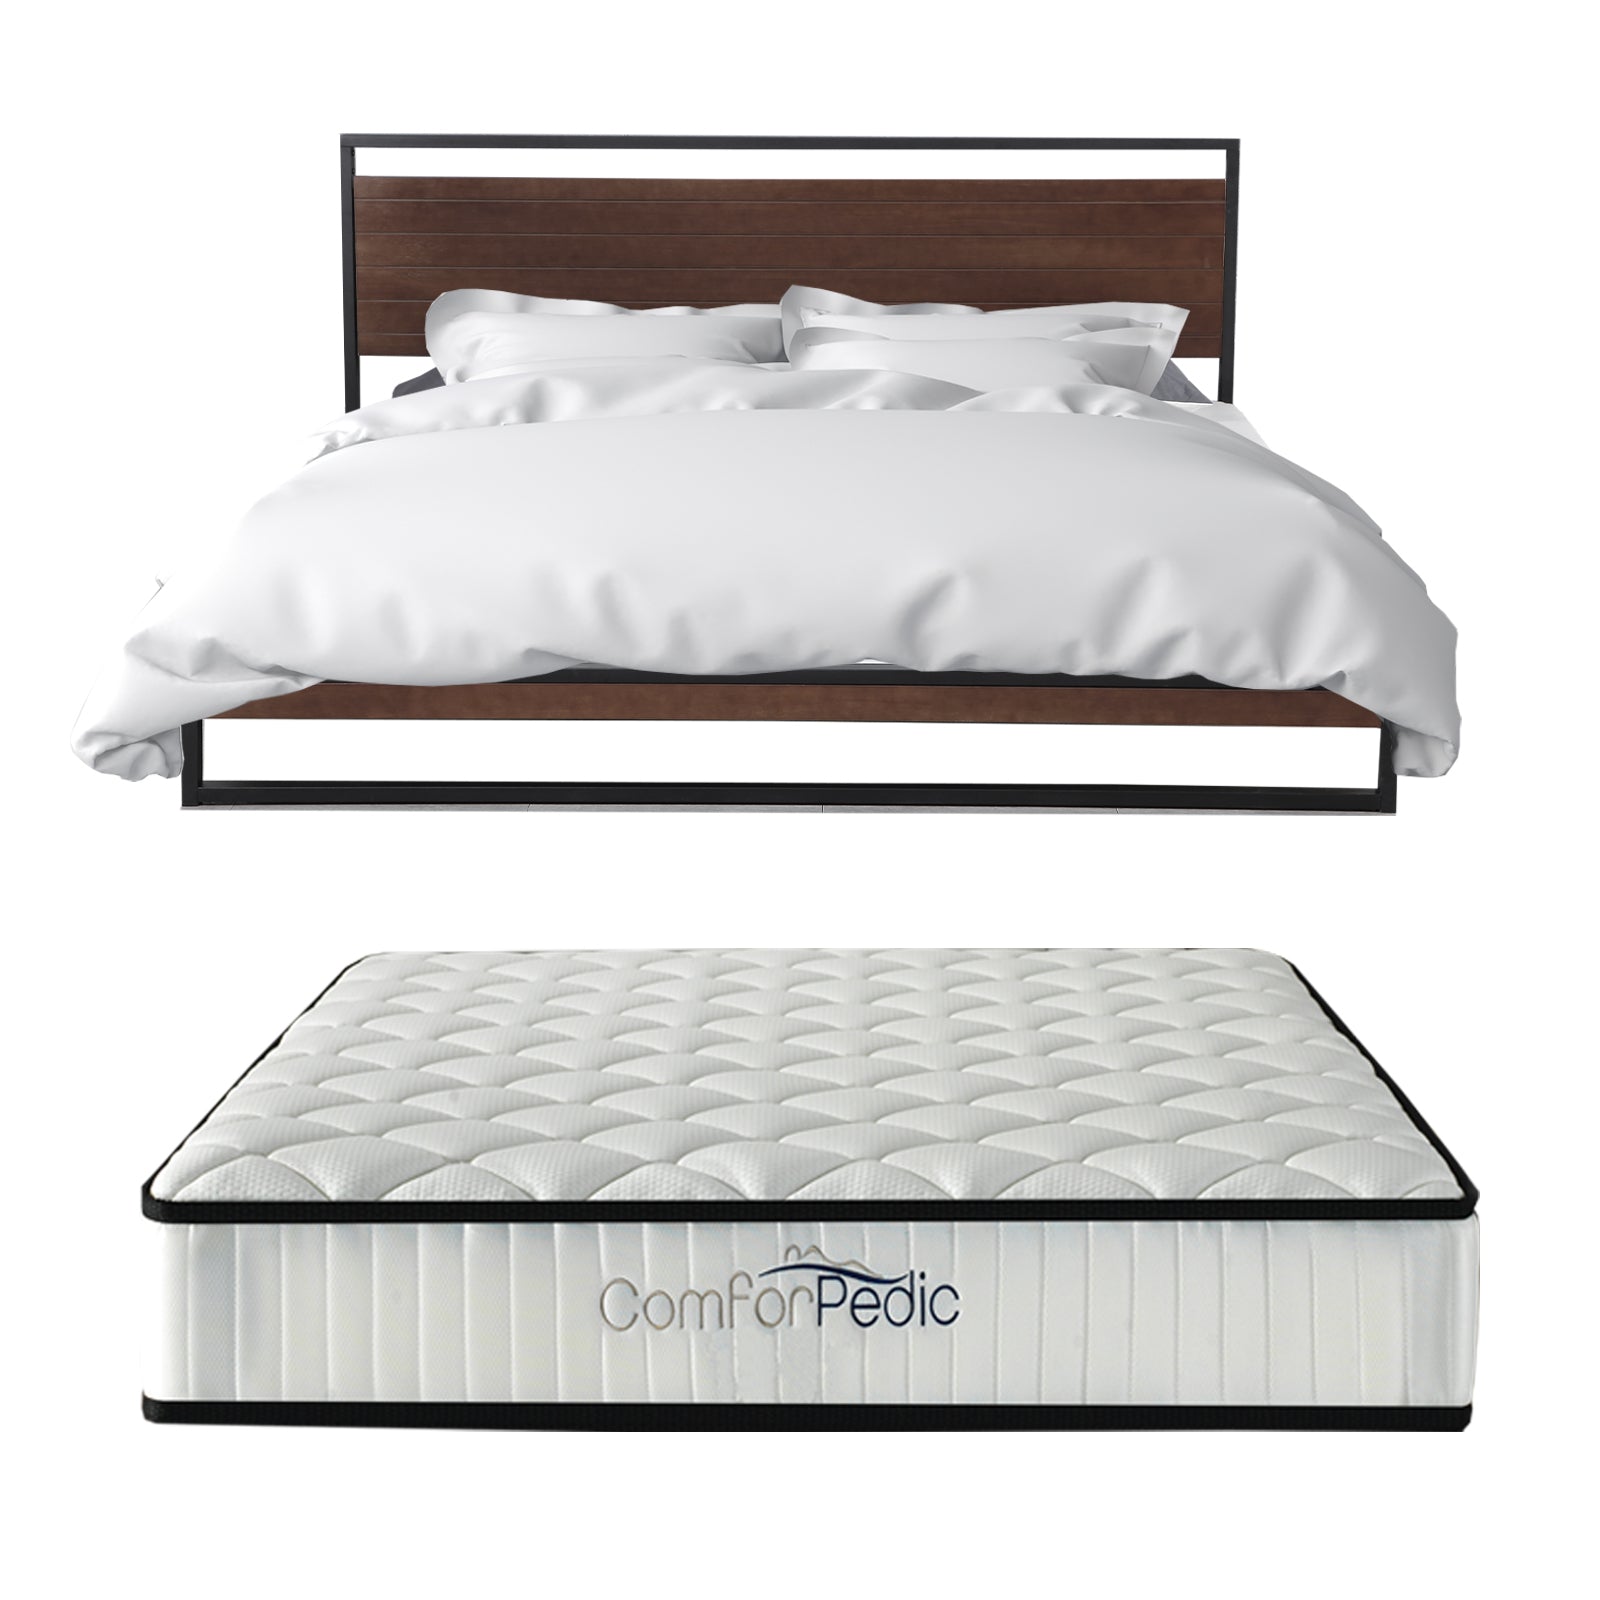 Azure Wood Bed Frame With Comforpedic Mattress Package Deal Bedroom Set - Double - White  Brown